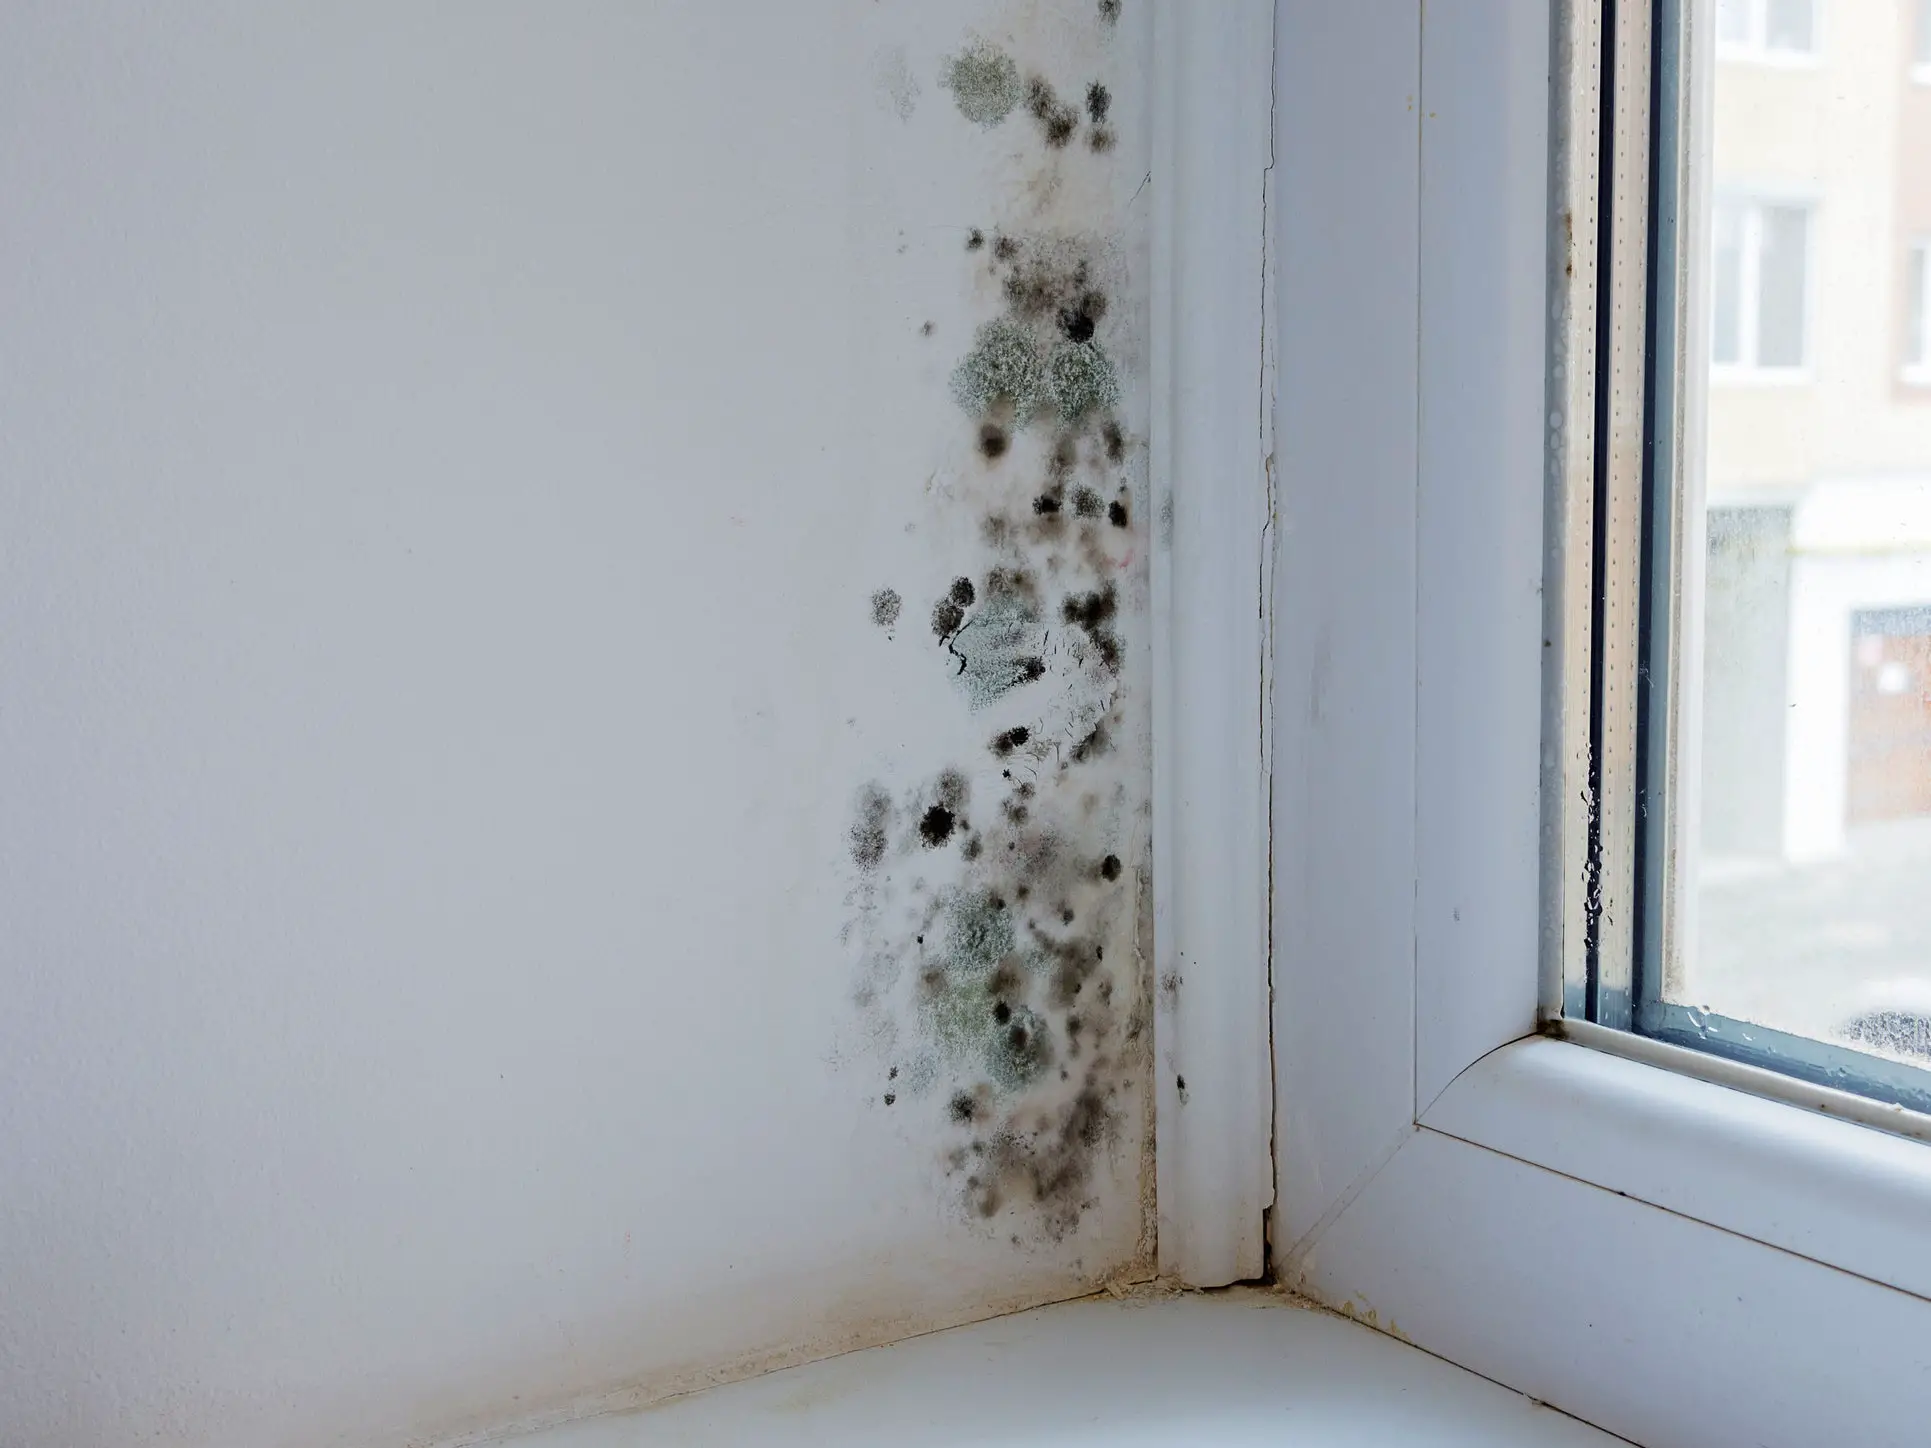 How Long Does It Take For Toxic Black Mold To Grow / Toxic Black Mold ...